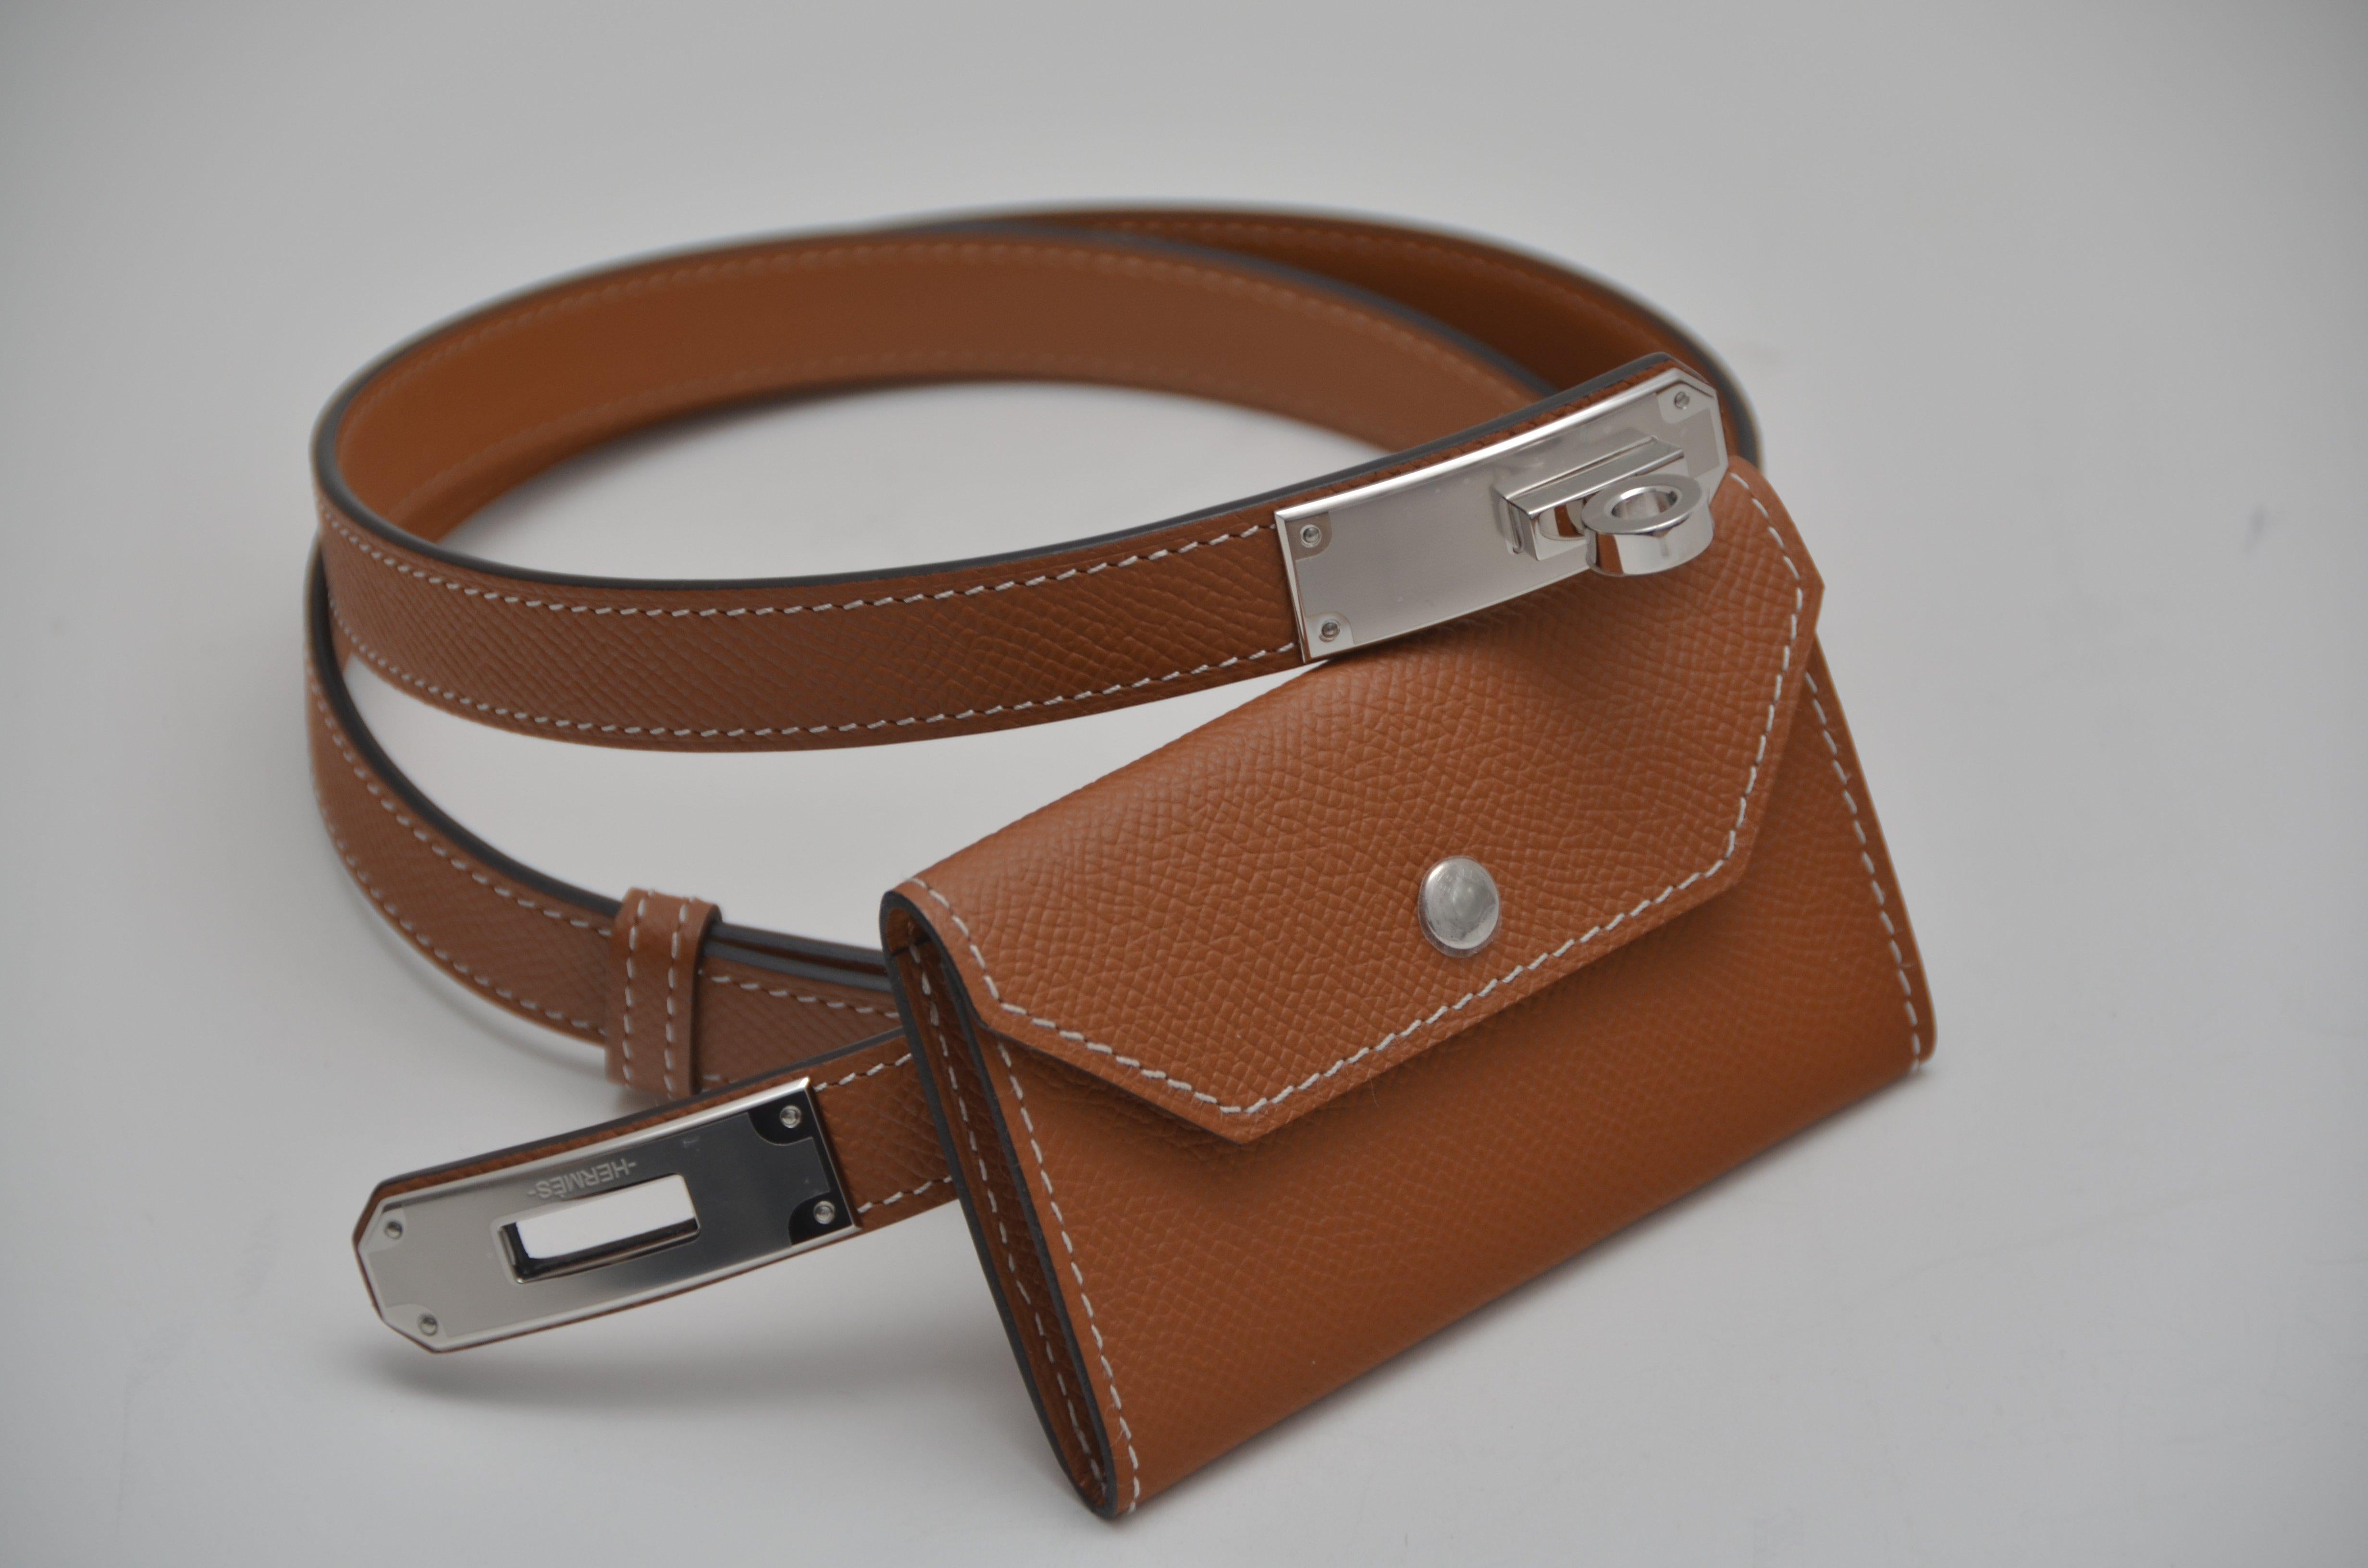 Hermes Kelly Pocket Belt Adjustable Gold Epsom Leather Palladium  Hardware
Super versatile: belt can be worn with or without pouch and can be adjusted between 23.5